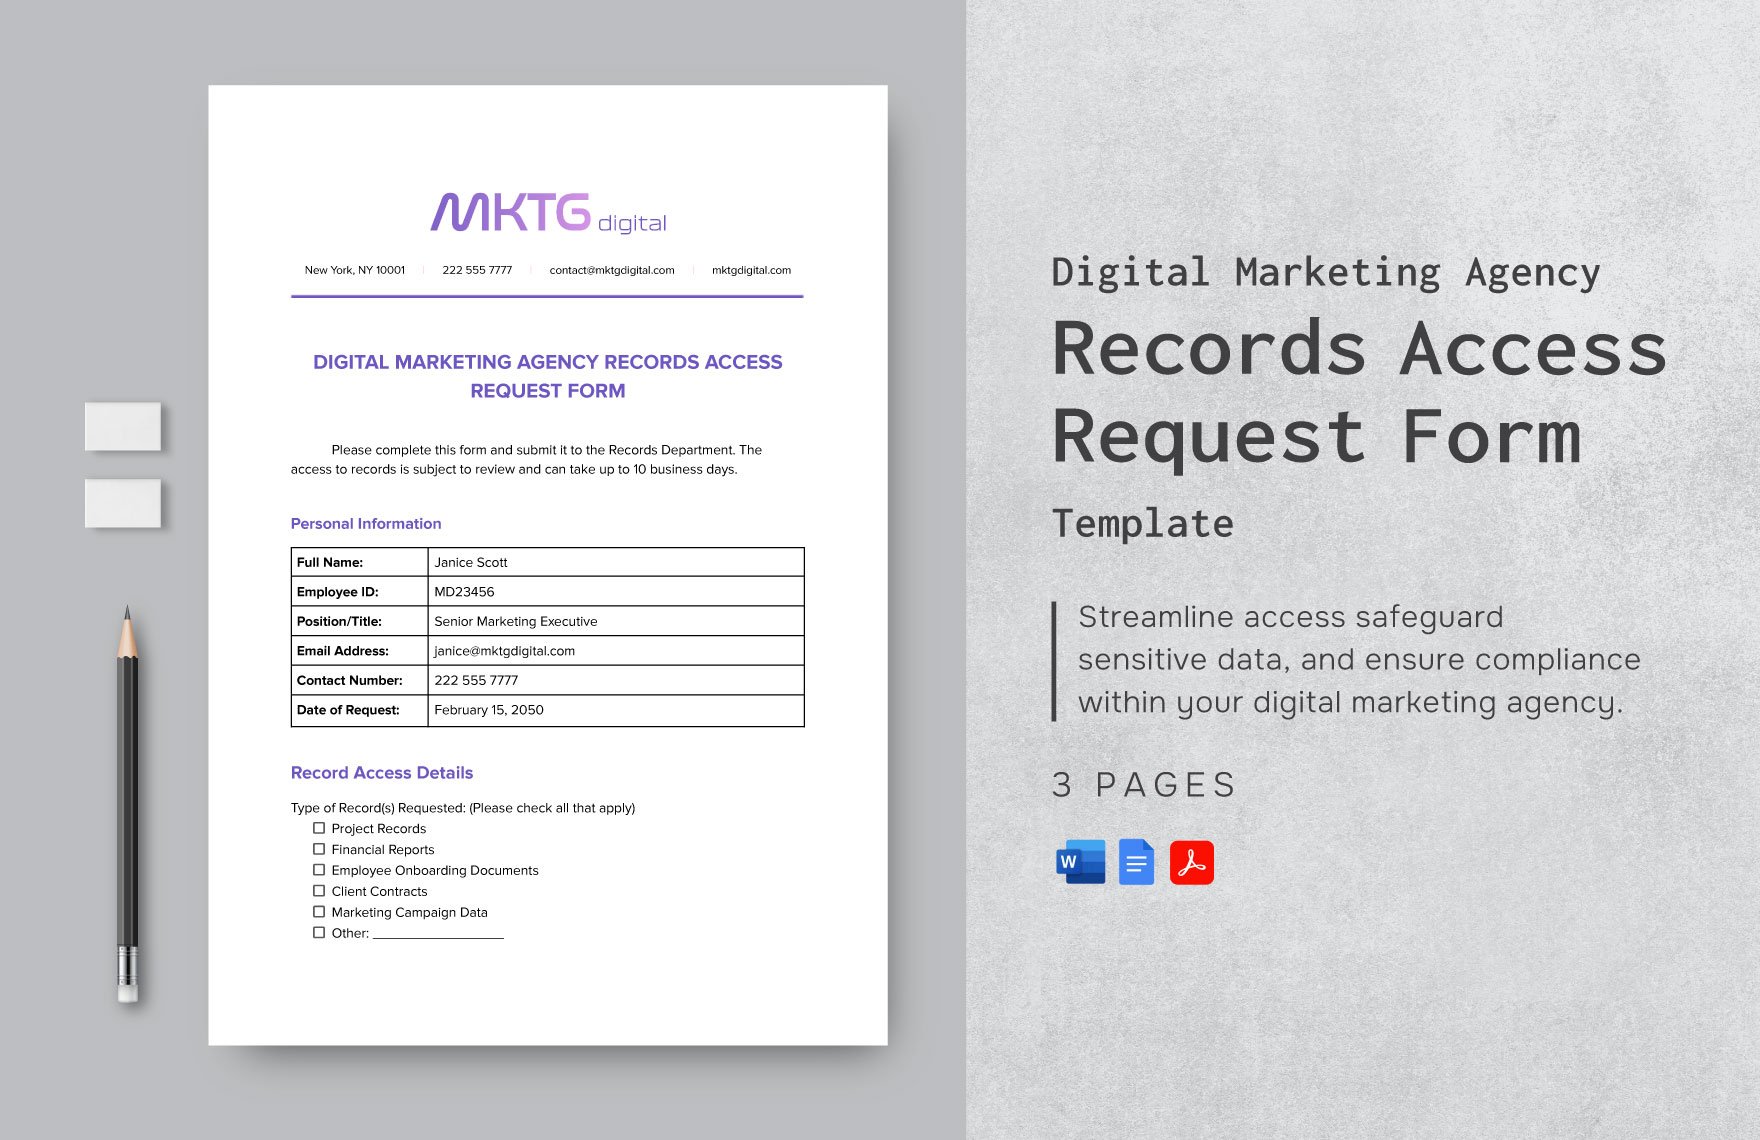 Digital Marketing Agency Records Access Request Form Template